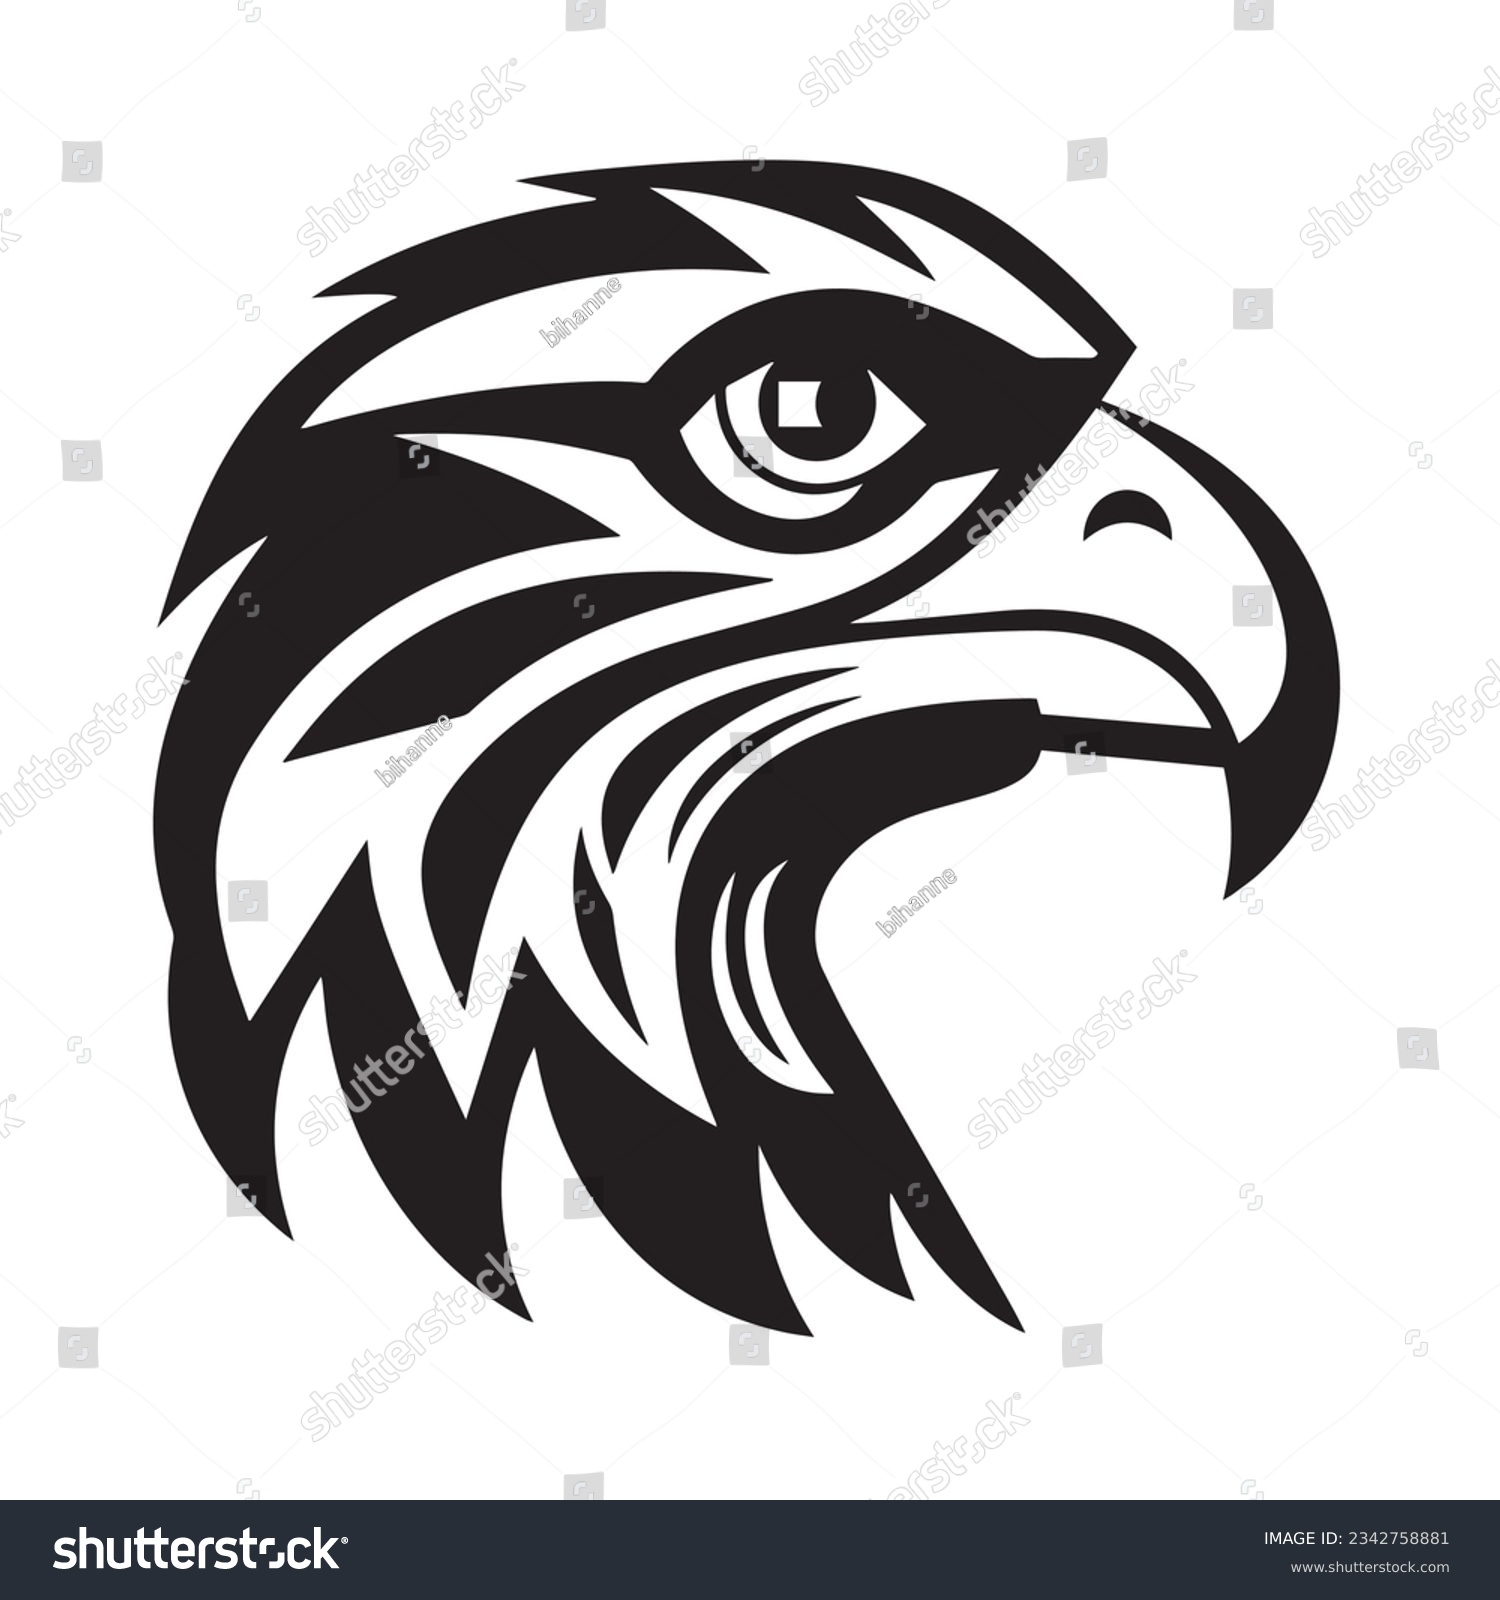 SVG of an icon svg of a head of an eagle no shadow black and white simple abstract shaman svg